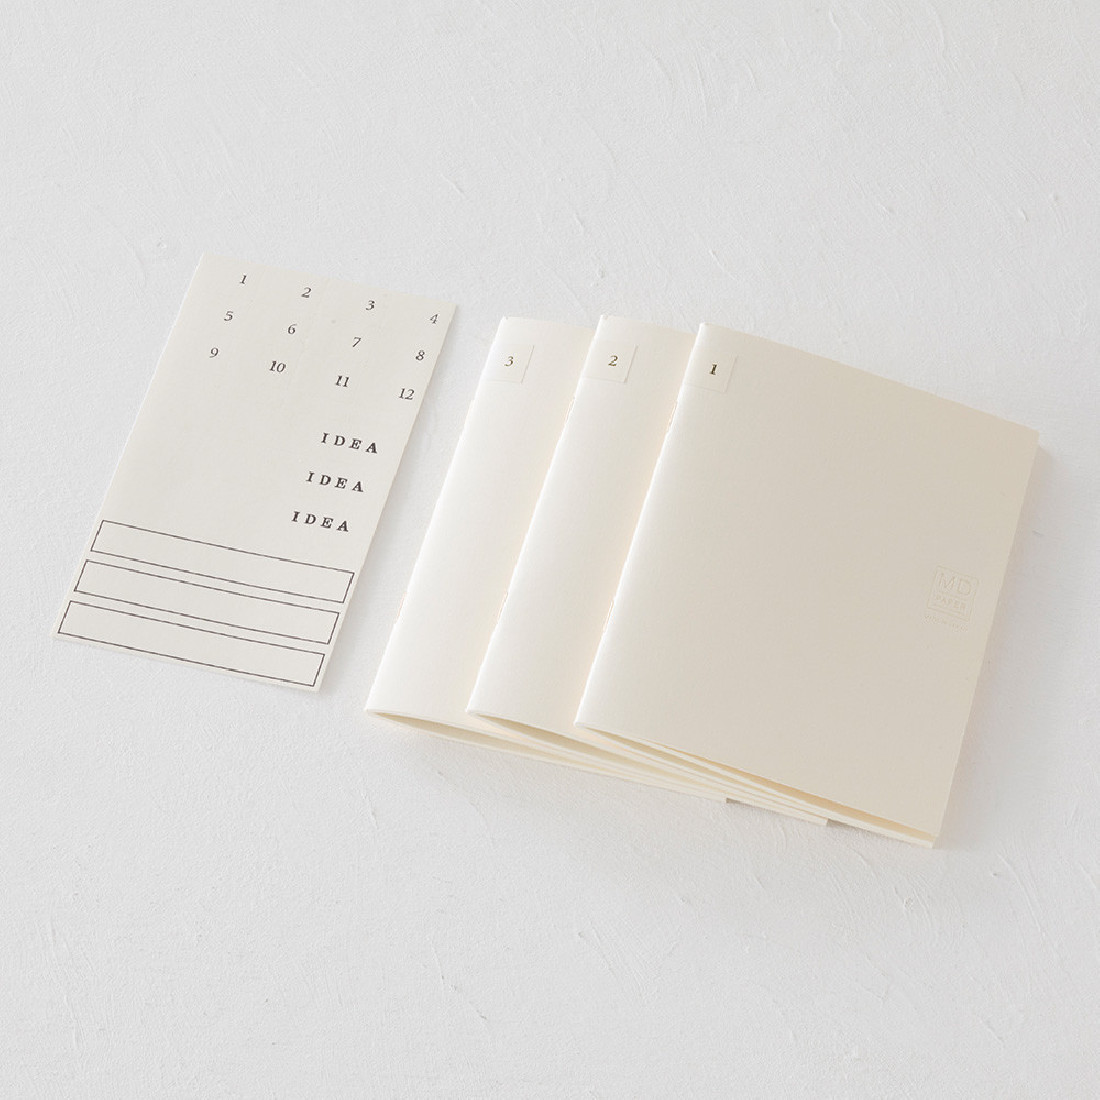 Midori MD Notebook Light A6 148x105mm, Blank, 3pcs pack, Label stickers, Saddle Stitched, 48 pages each, 15297006